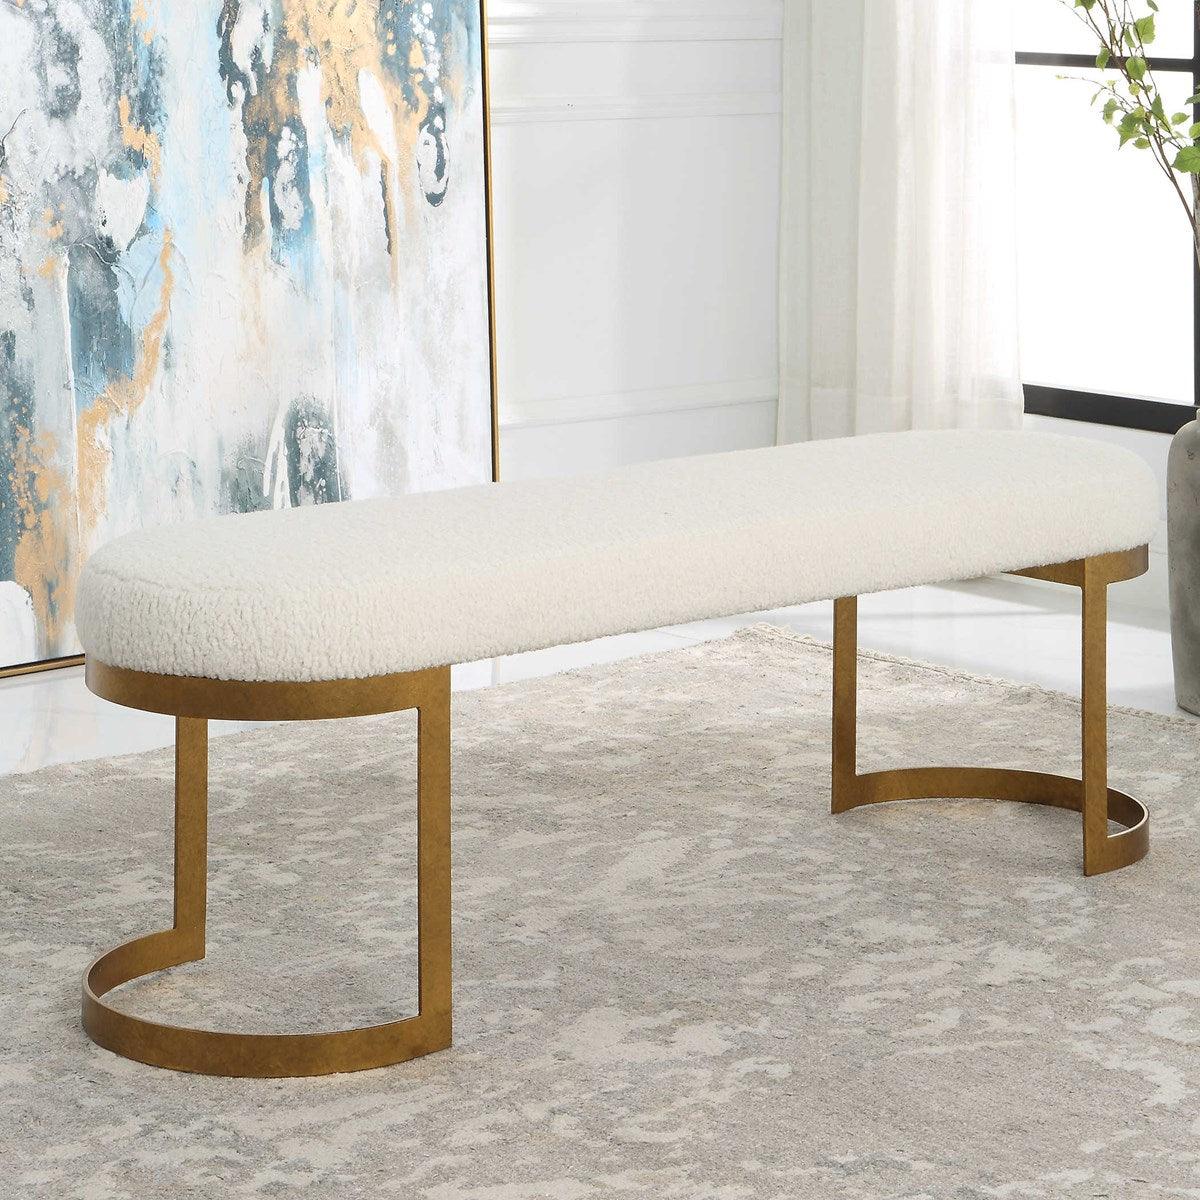 The Uttermost - Infinity Bench - 23757 | Montreal Lighting & Hardware